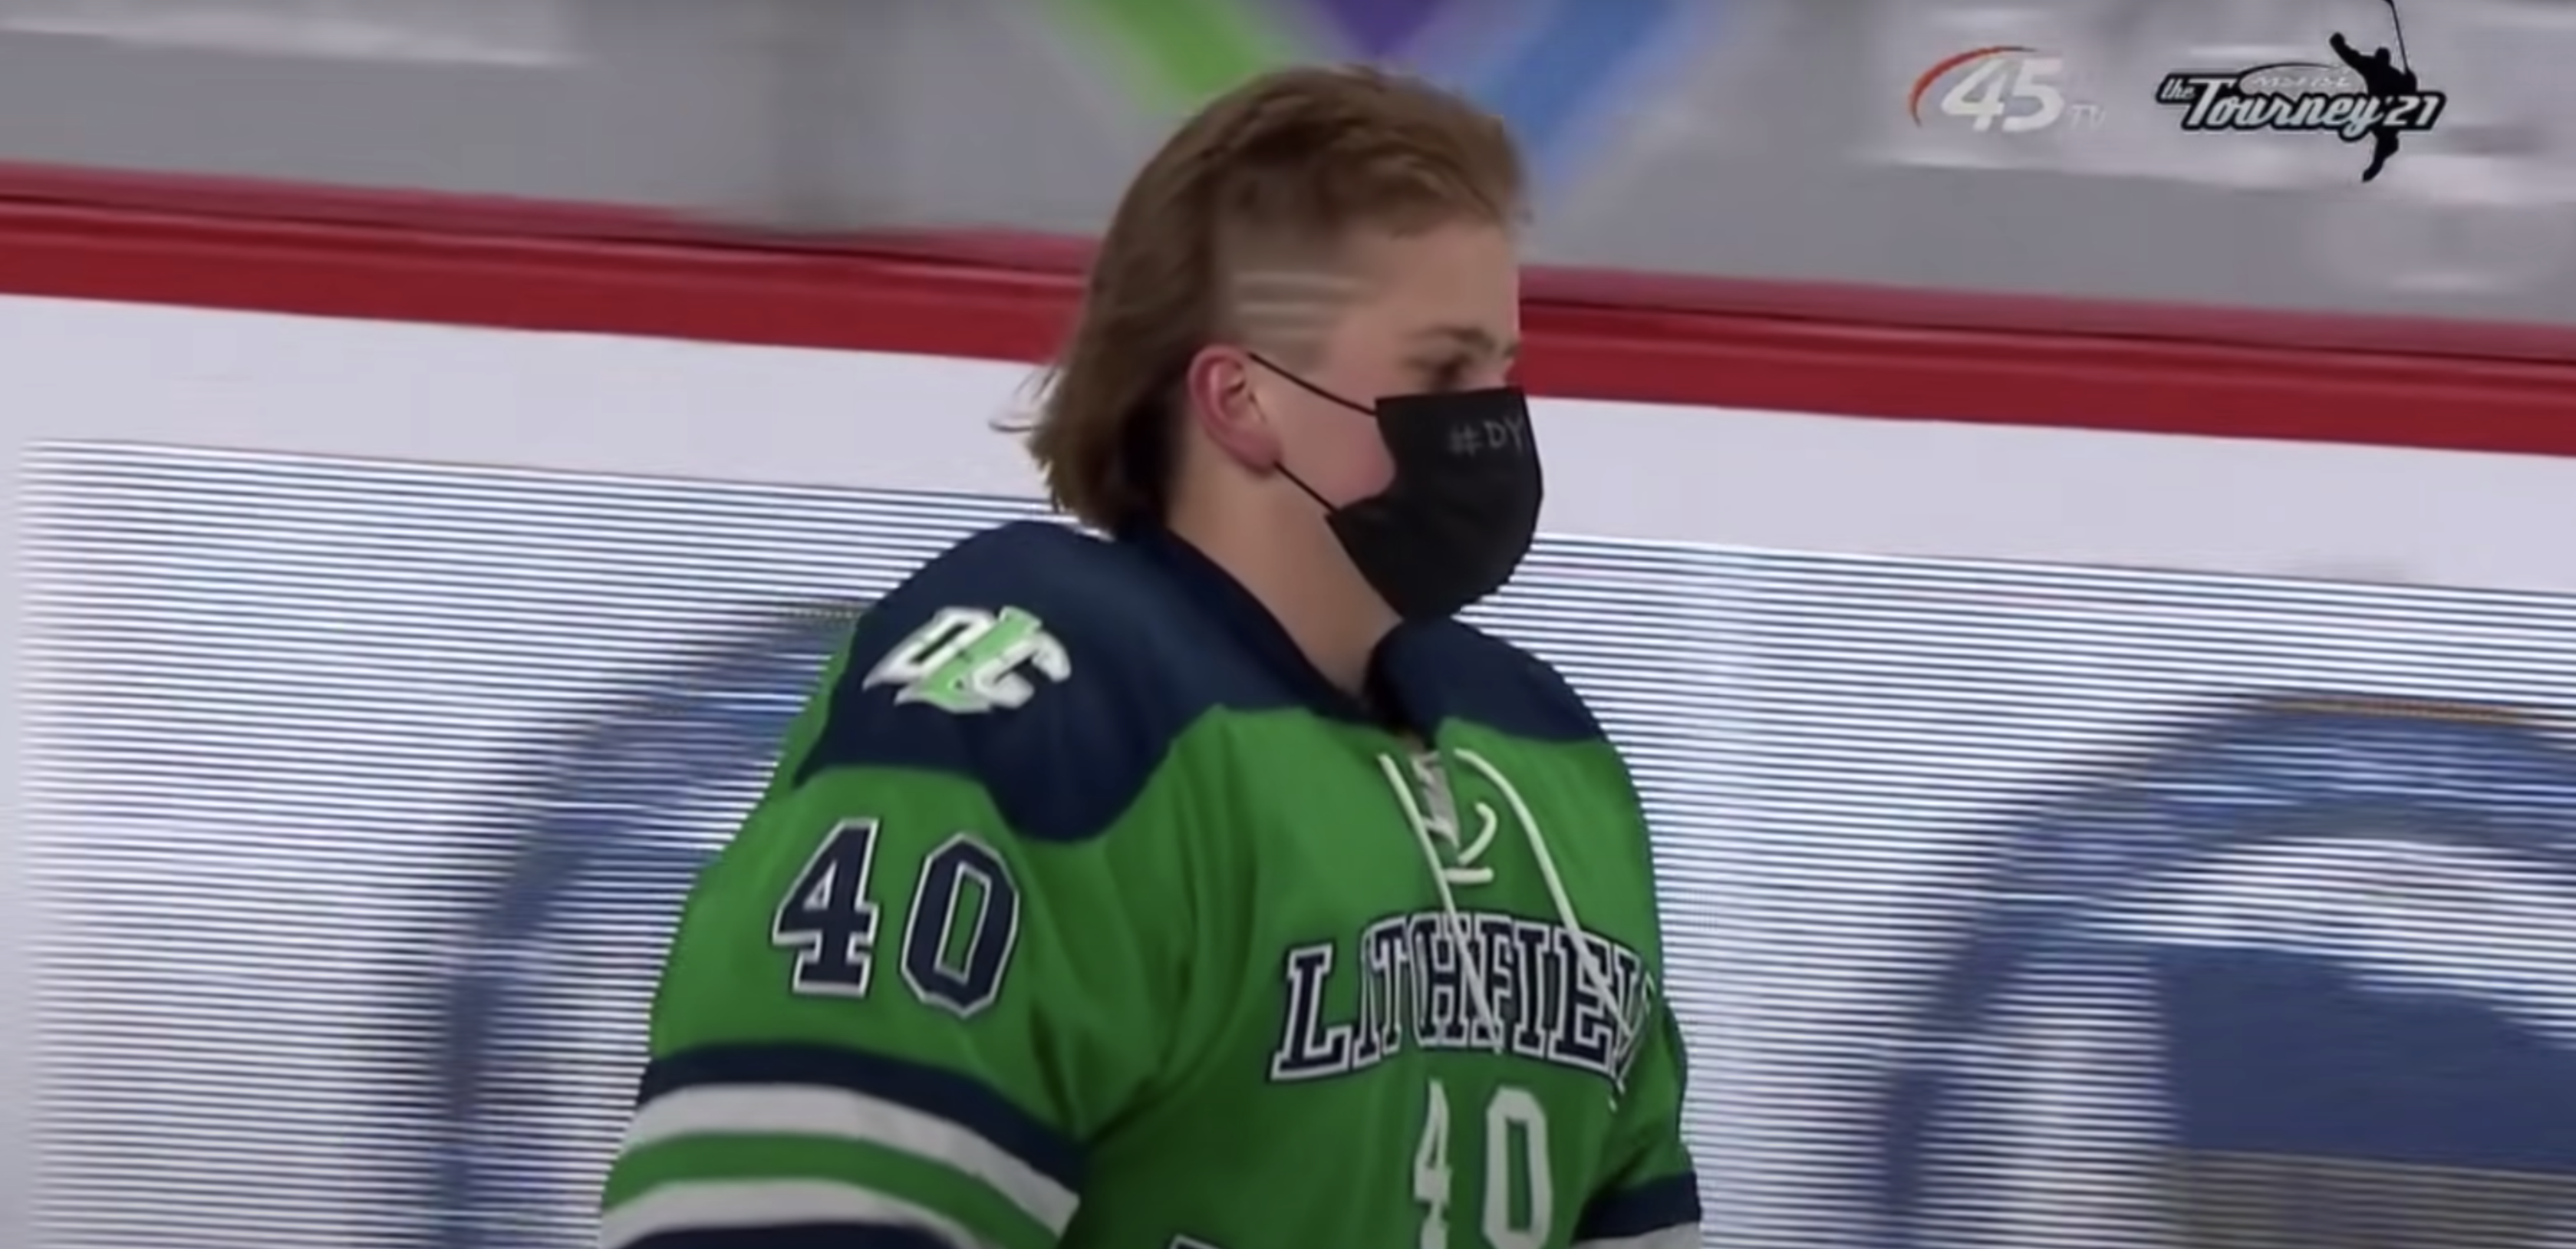 Two High School Hockey Teams From Minnesota Have The Freshest Cuts